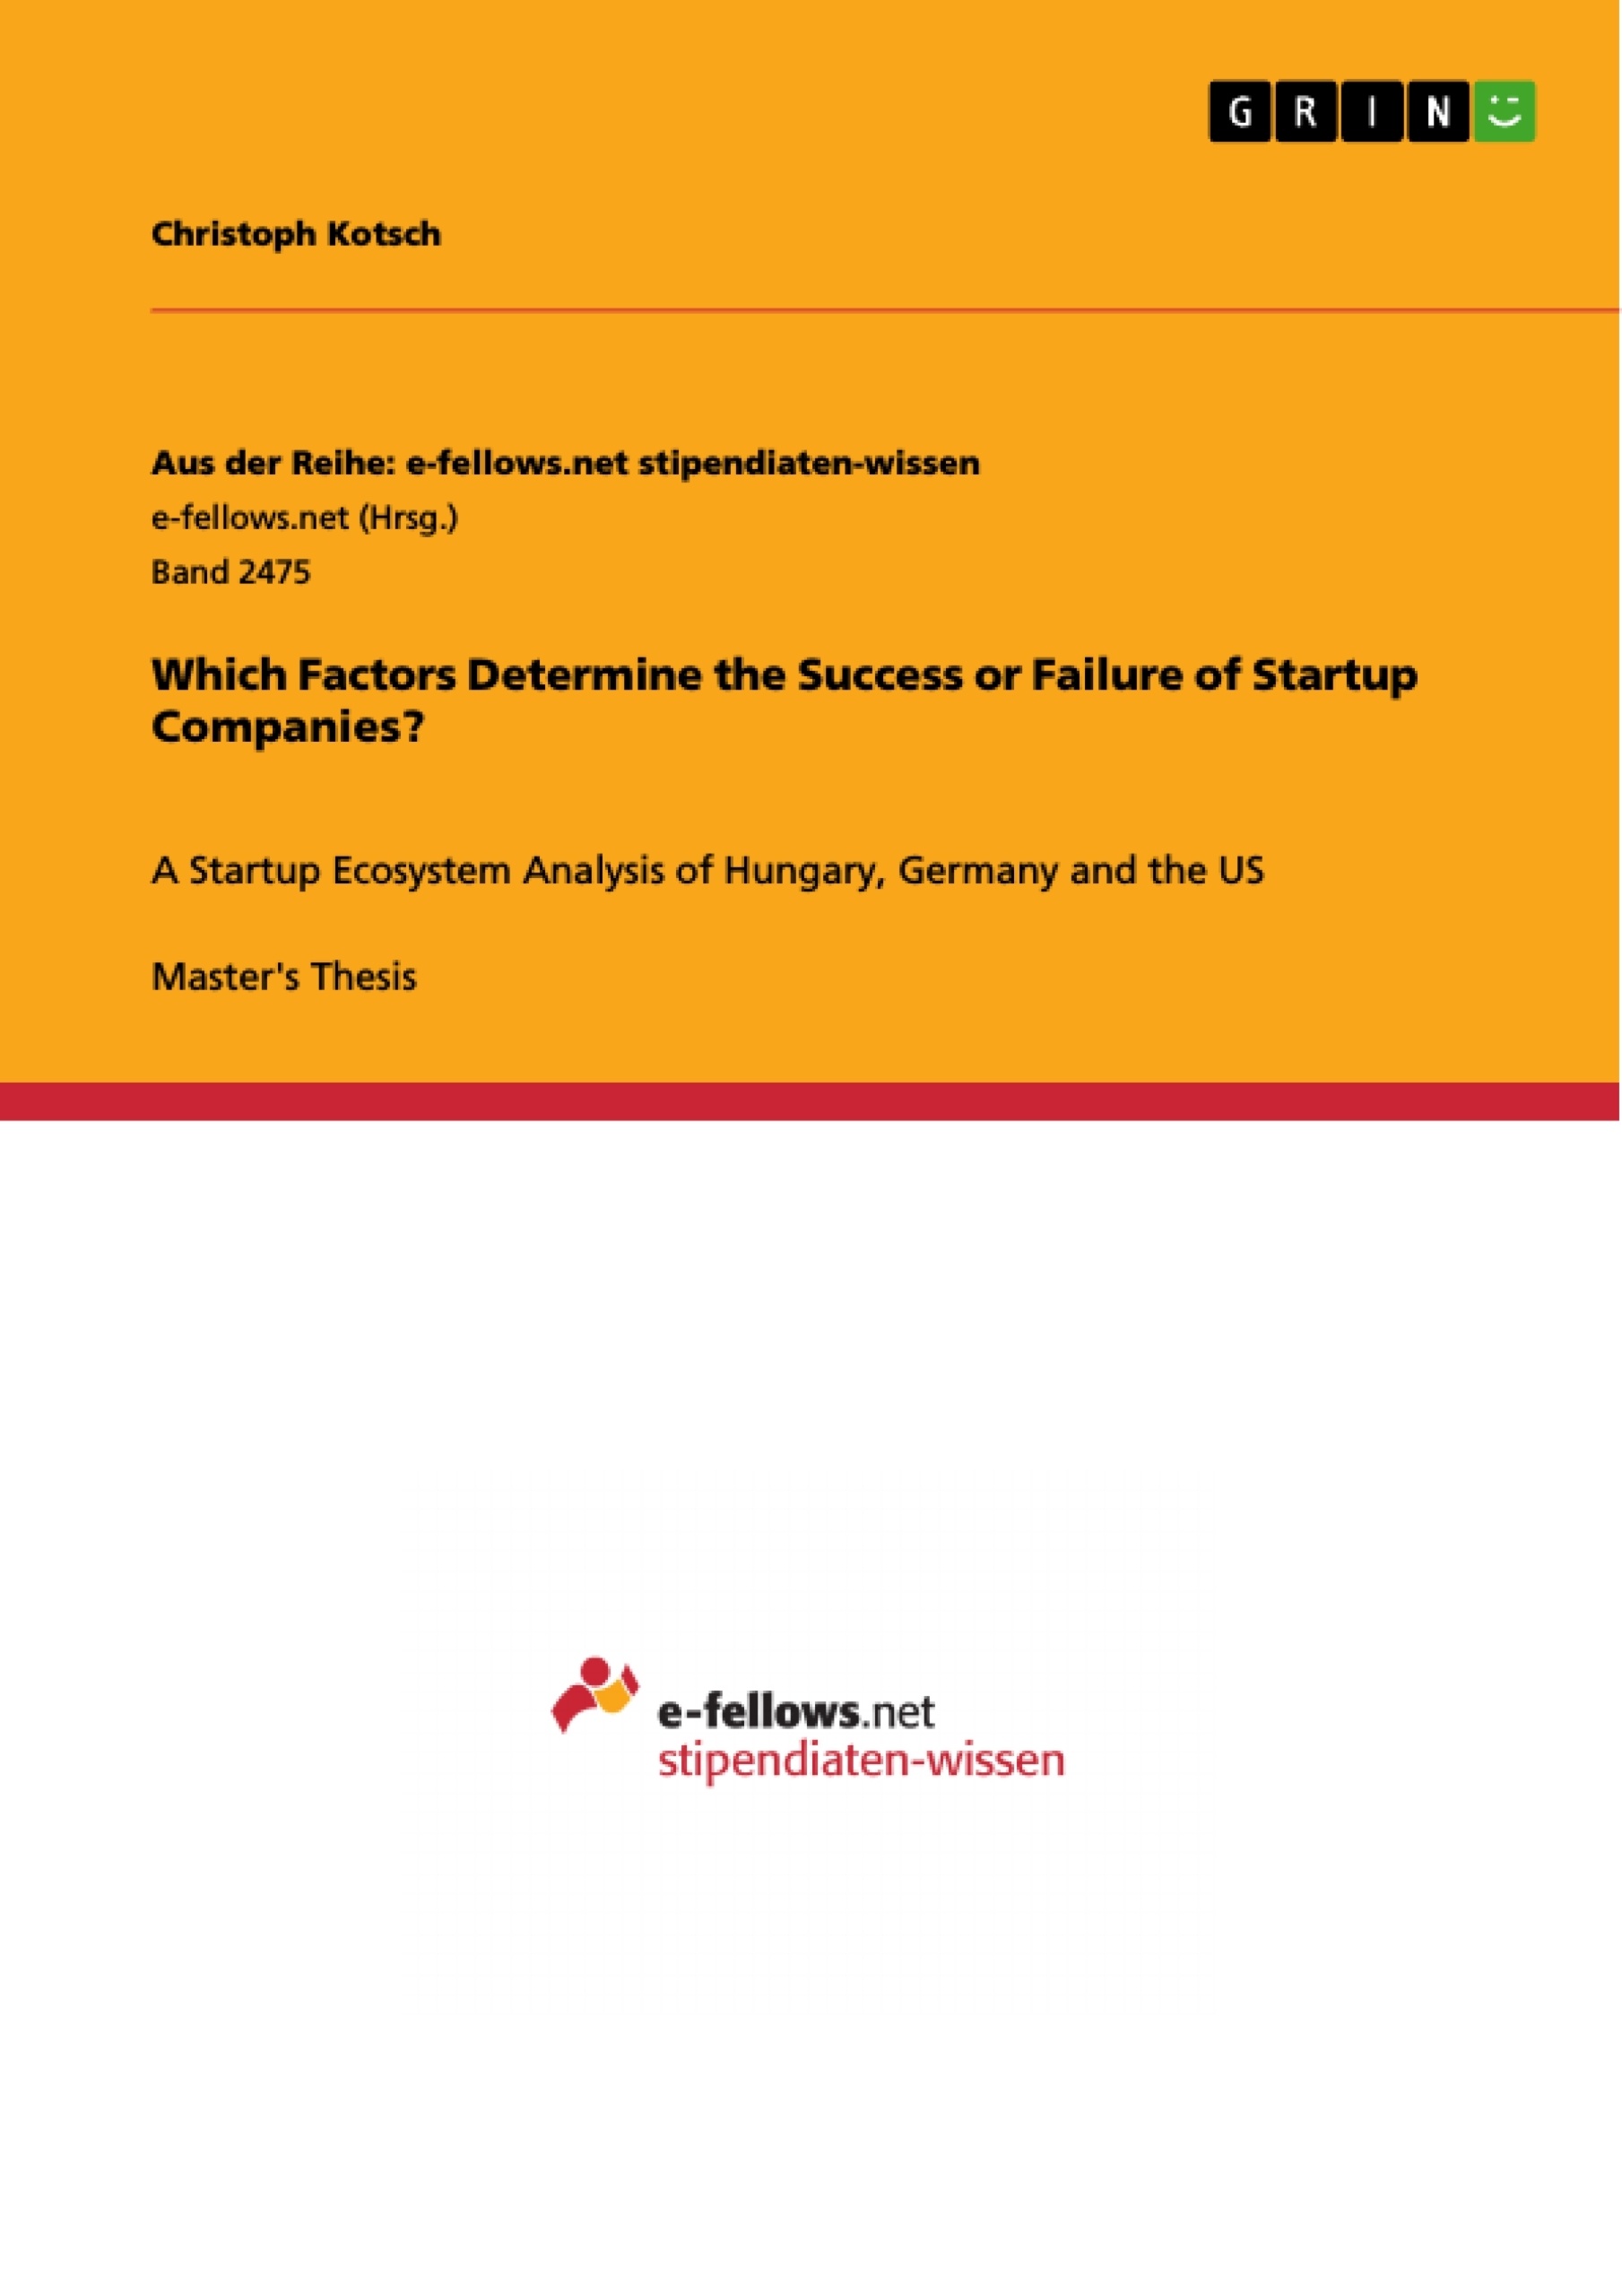 Titre: Which Factors Determine the Success or Failure of Startup Companies?